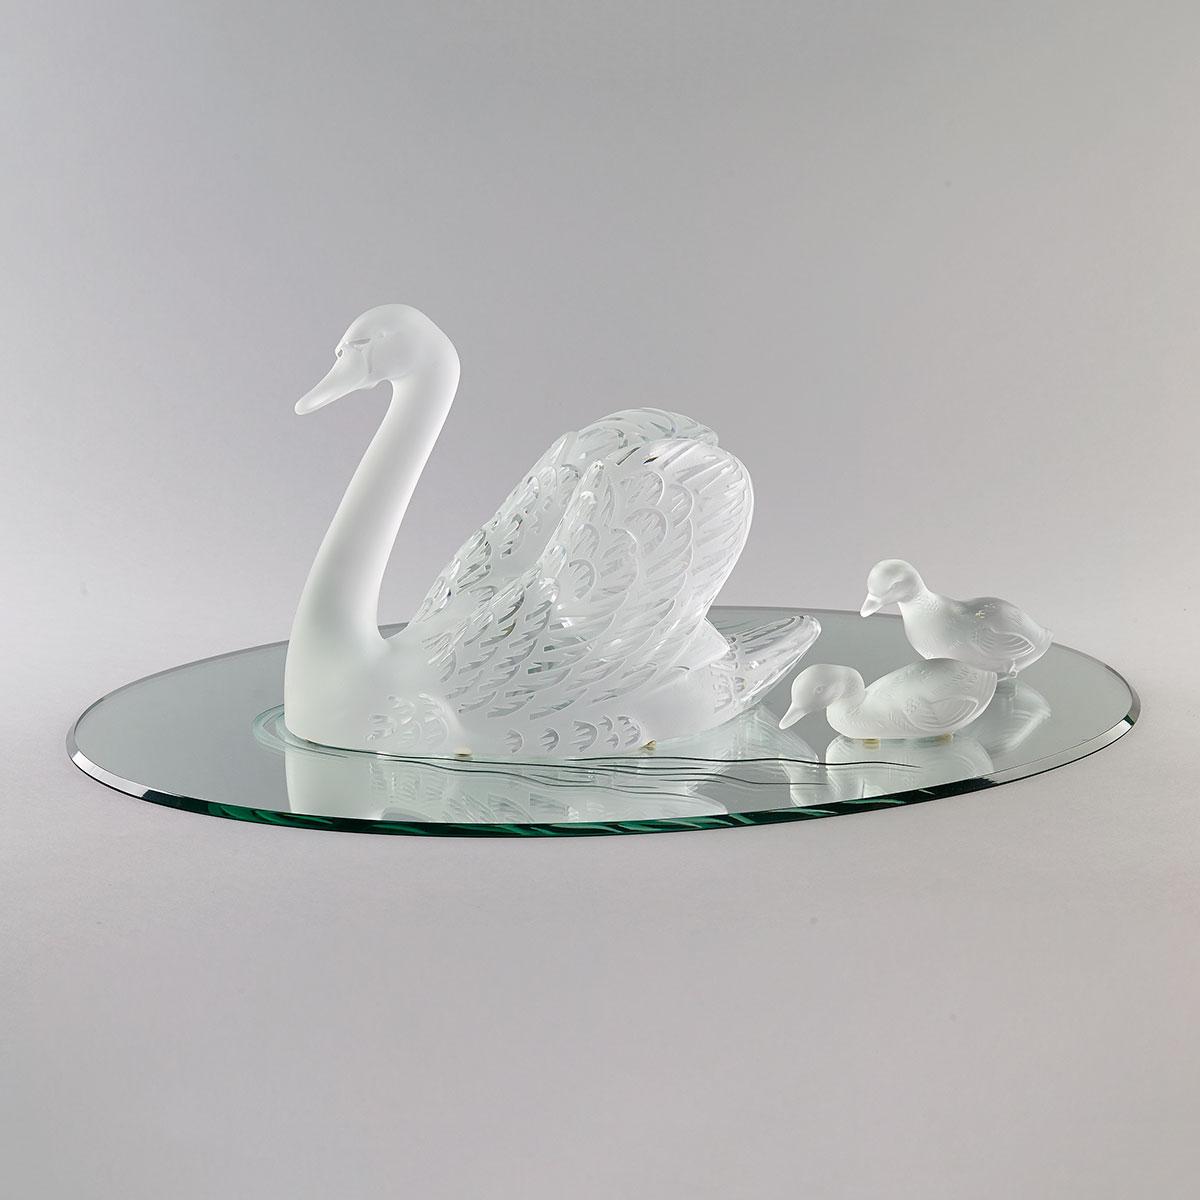 ‘Cygne, Tête Haute’, Lalique Moulded and Partly Frosted Glass Swan with Two Baccarat Cygnets on Mirror Plateau, 20th century